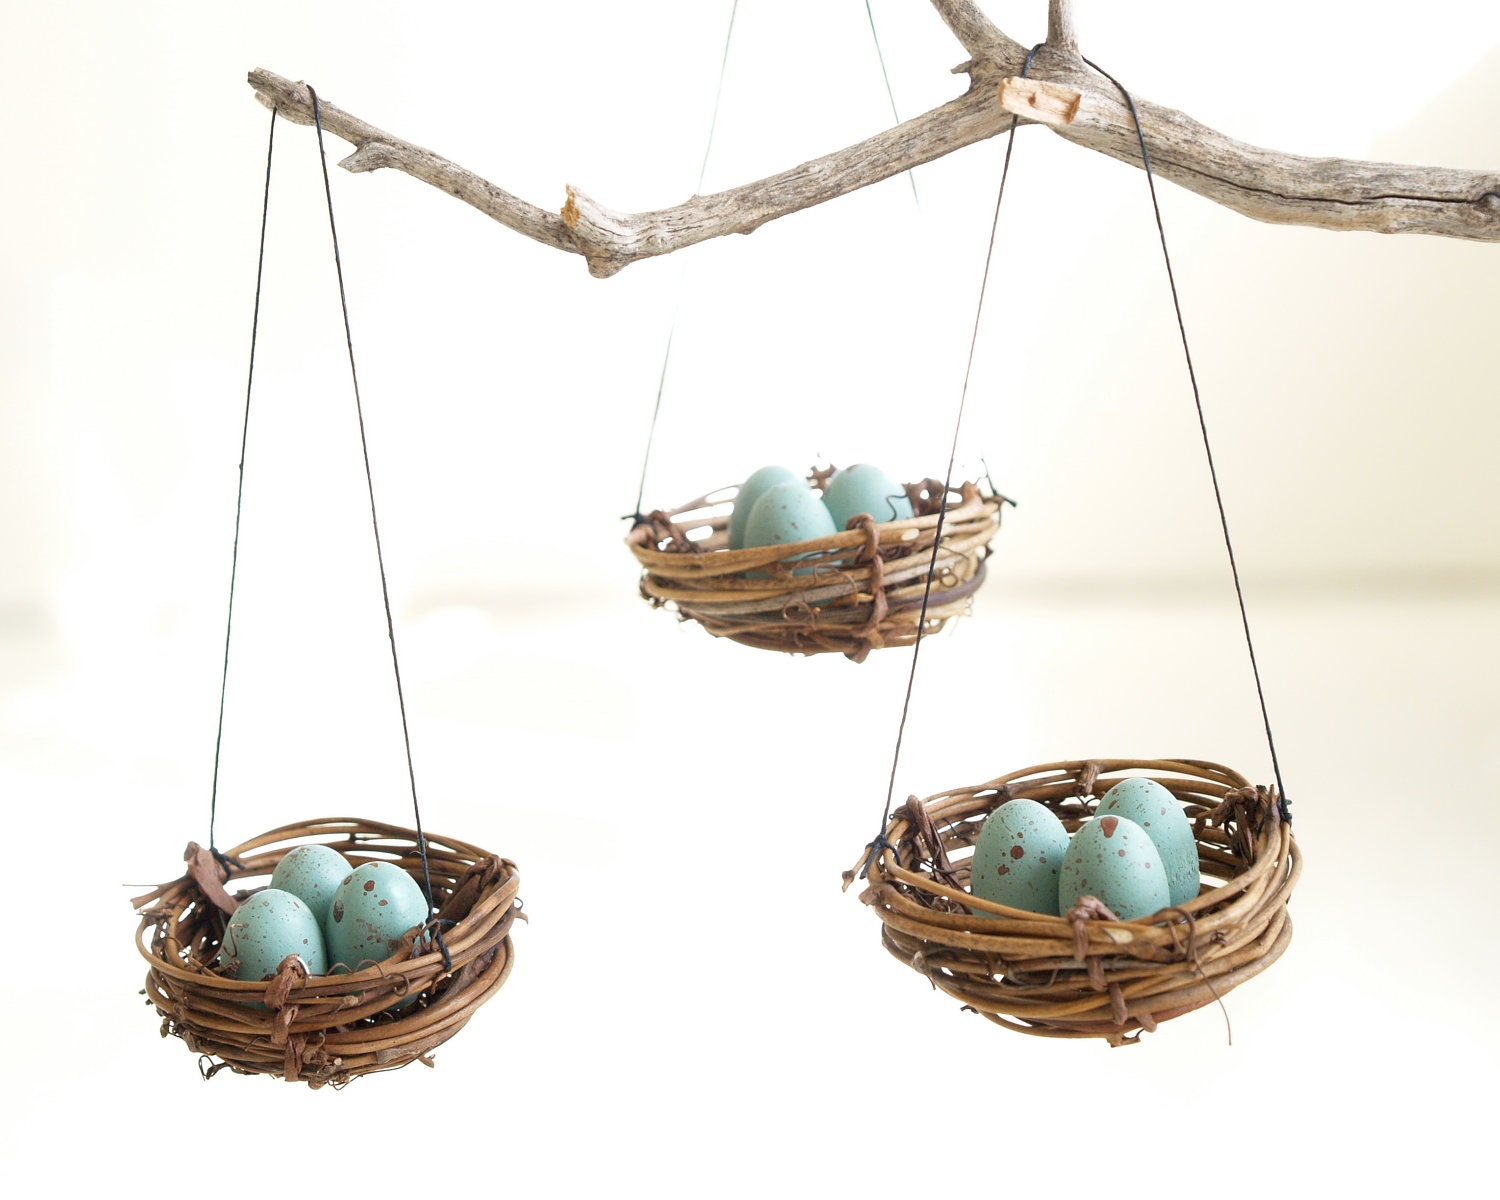 Easter Egg Ornaments, Blue Robins Egg Nests, Tree Decorations, Spring Decorating, natural nature inspired handmade eco friendly Home Decor - Fairyfolk